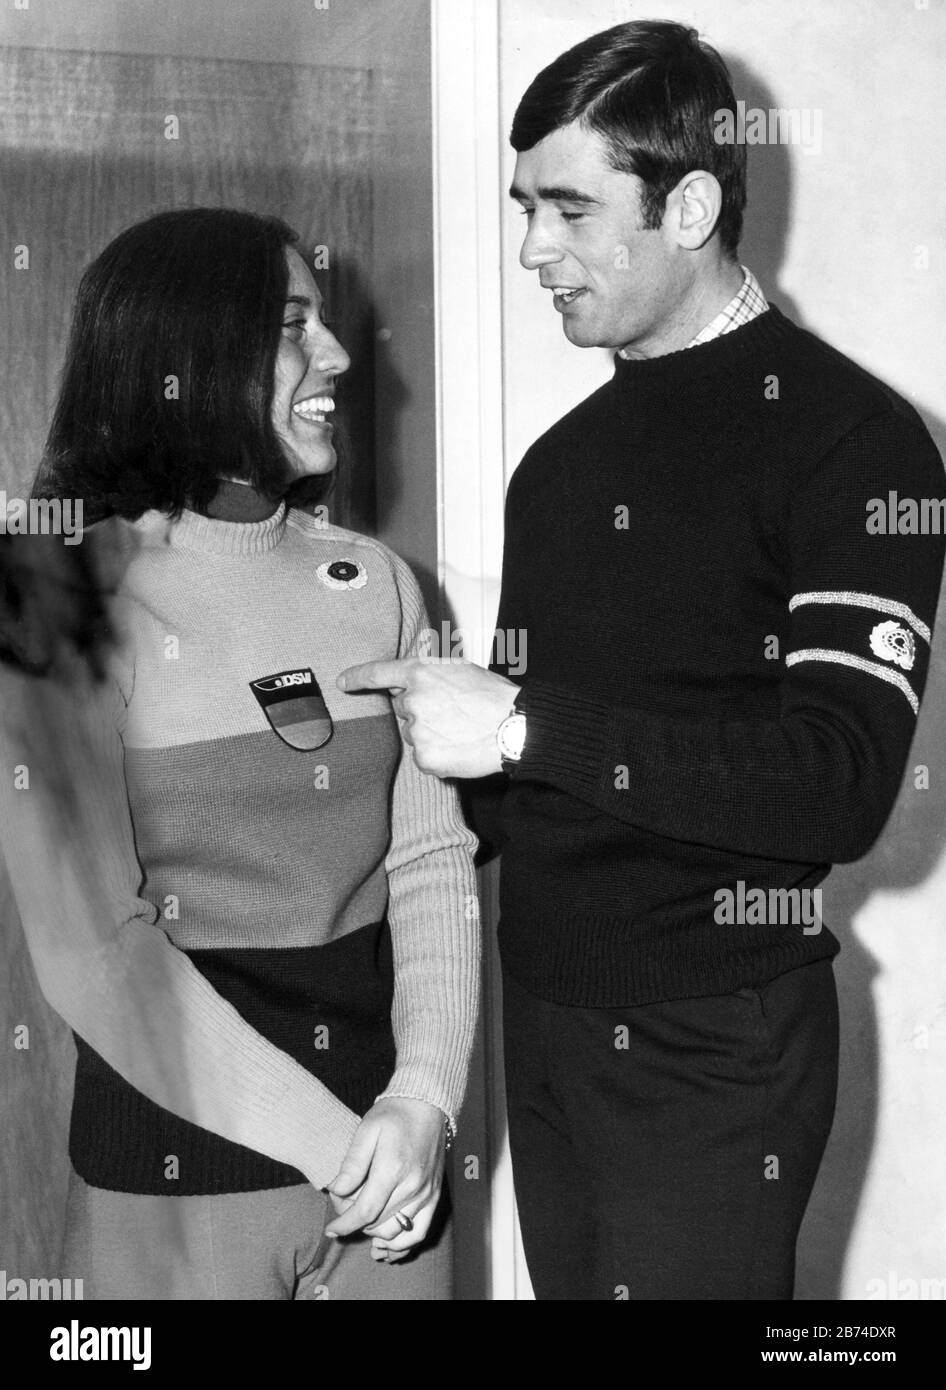 Rosi Mittermaier presents the new pullover of the German ski team in the national colours on 22 December 1970 in Munich. Speed skater Erhard Keller received a black sweater with gold stripes on his sleeves for his Olympic victory. | usage worldwide Stock Photo